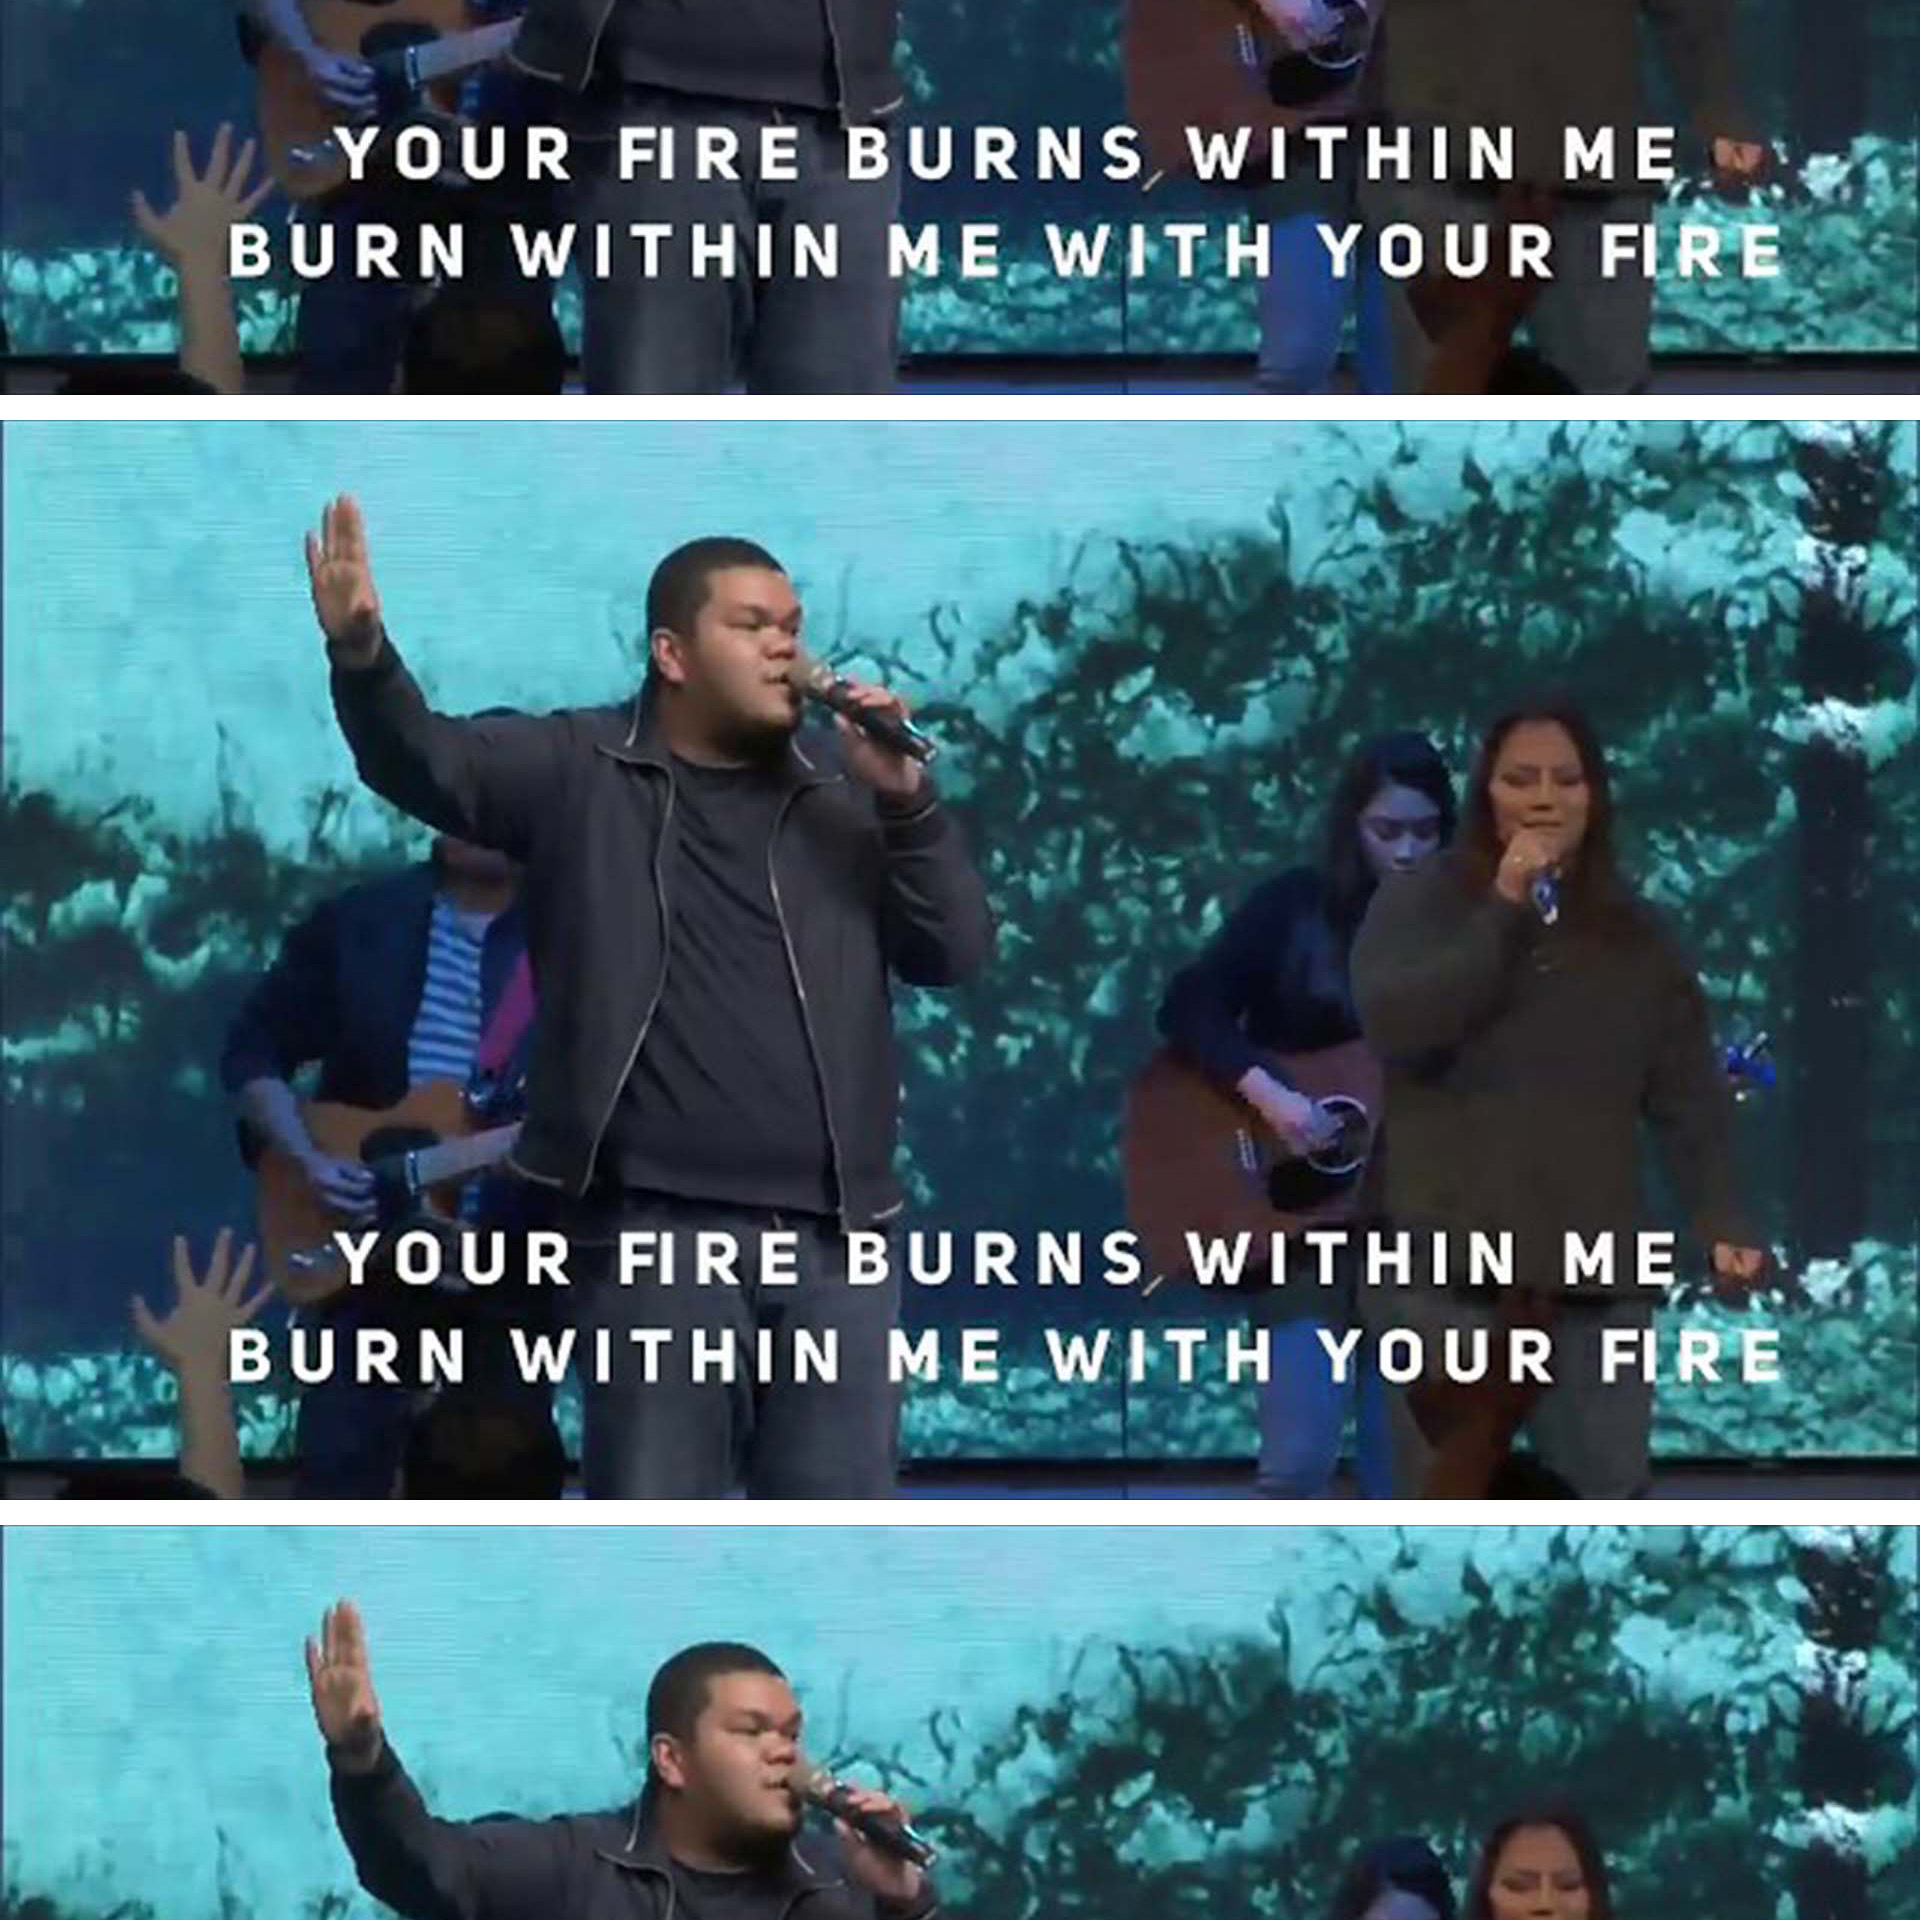 “Fire Burns” by Jon Owens | Live Worship by Victory Fort